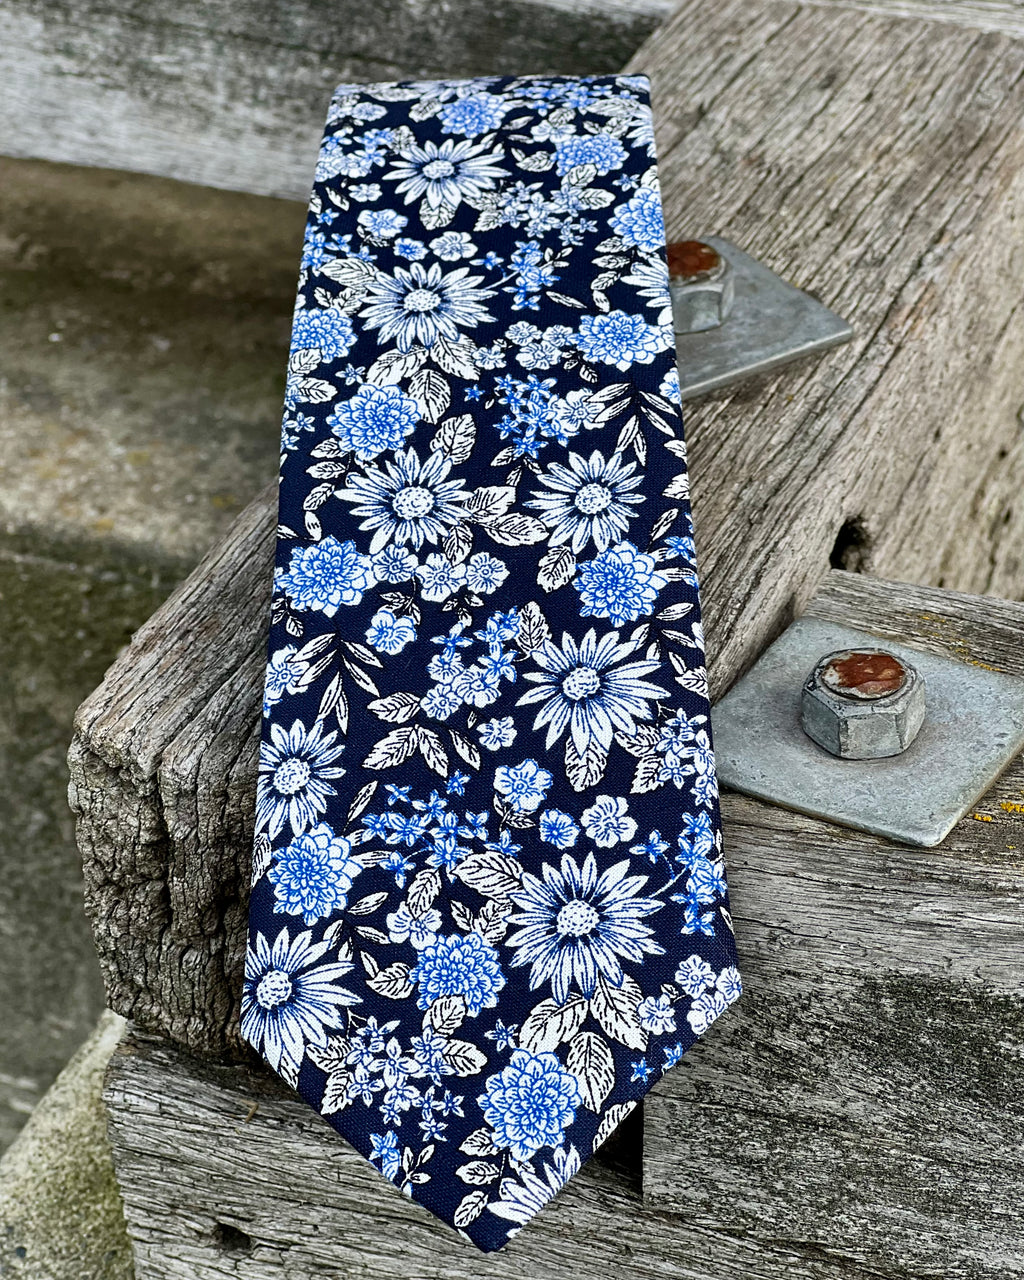 Blue Floral Polyester tie by The Tie Company